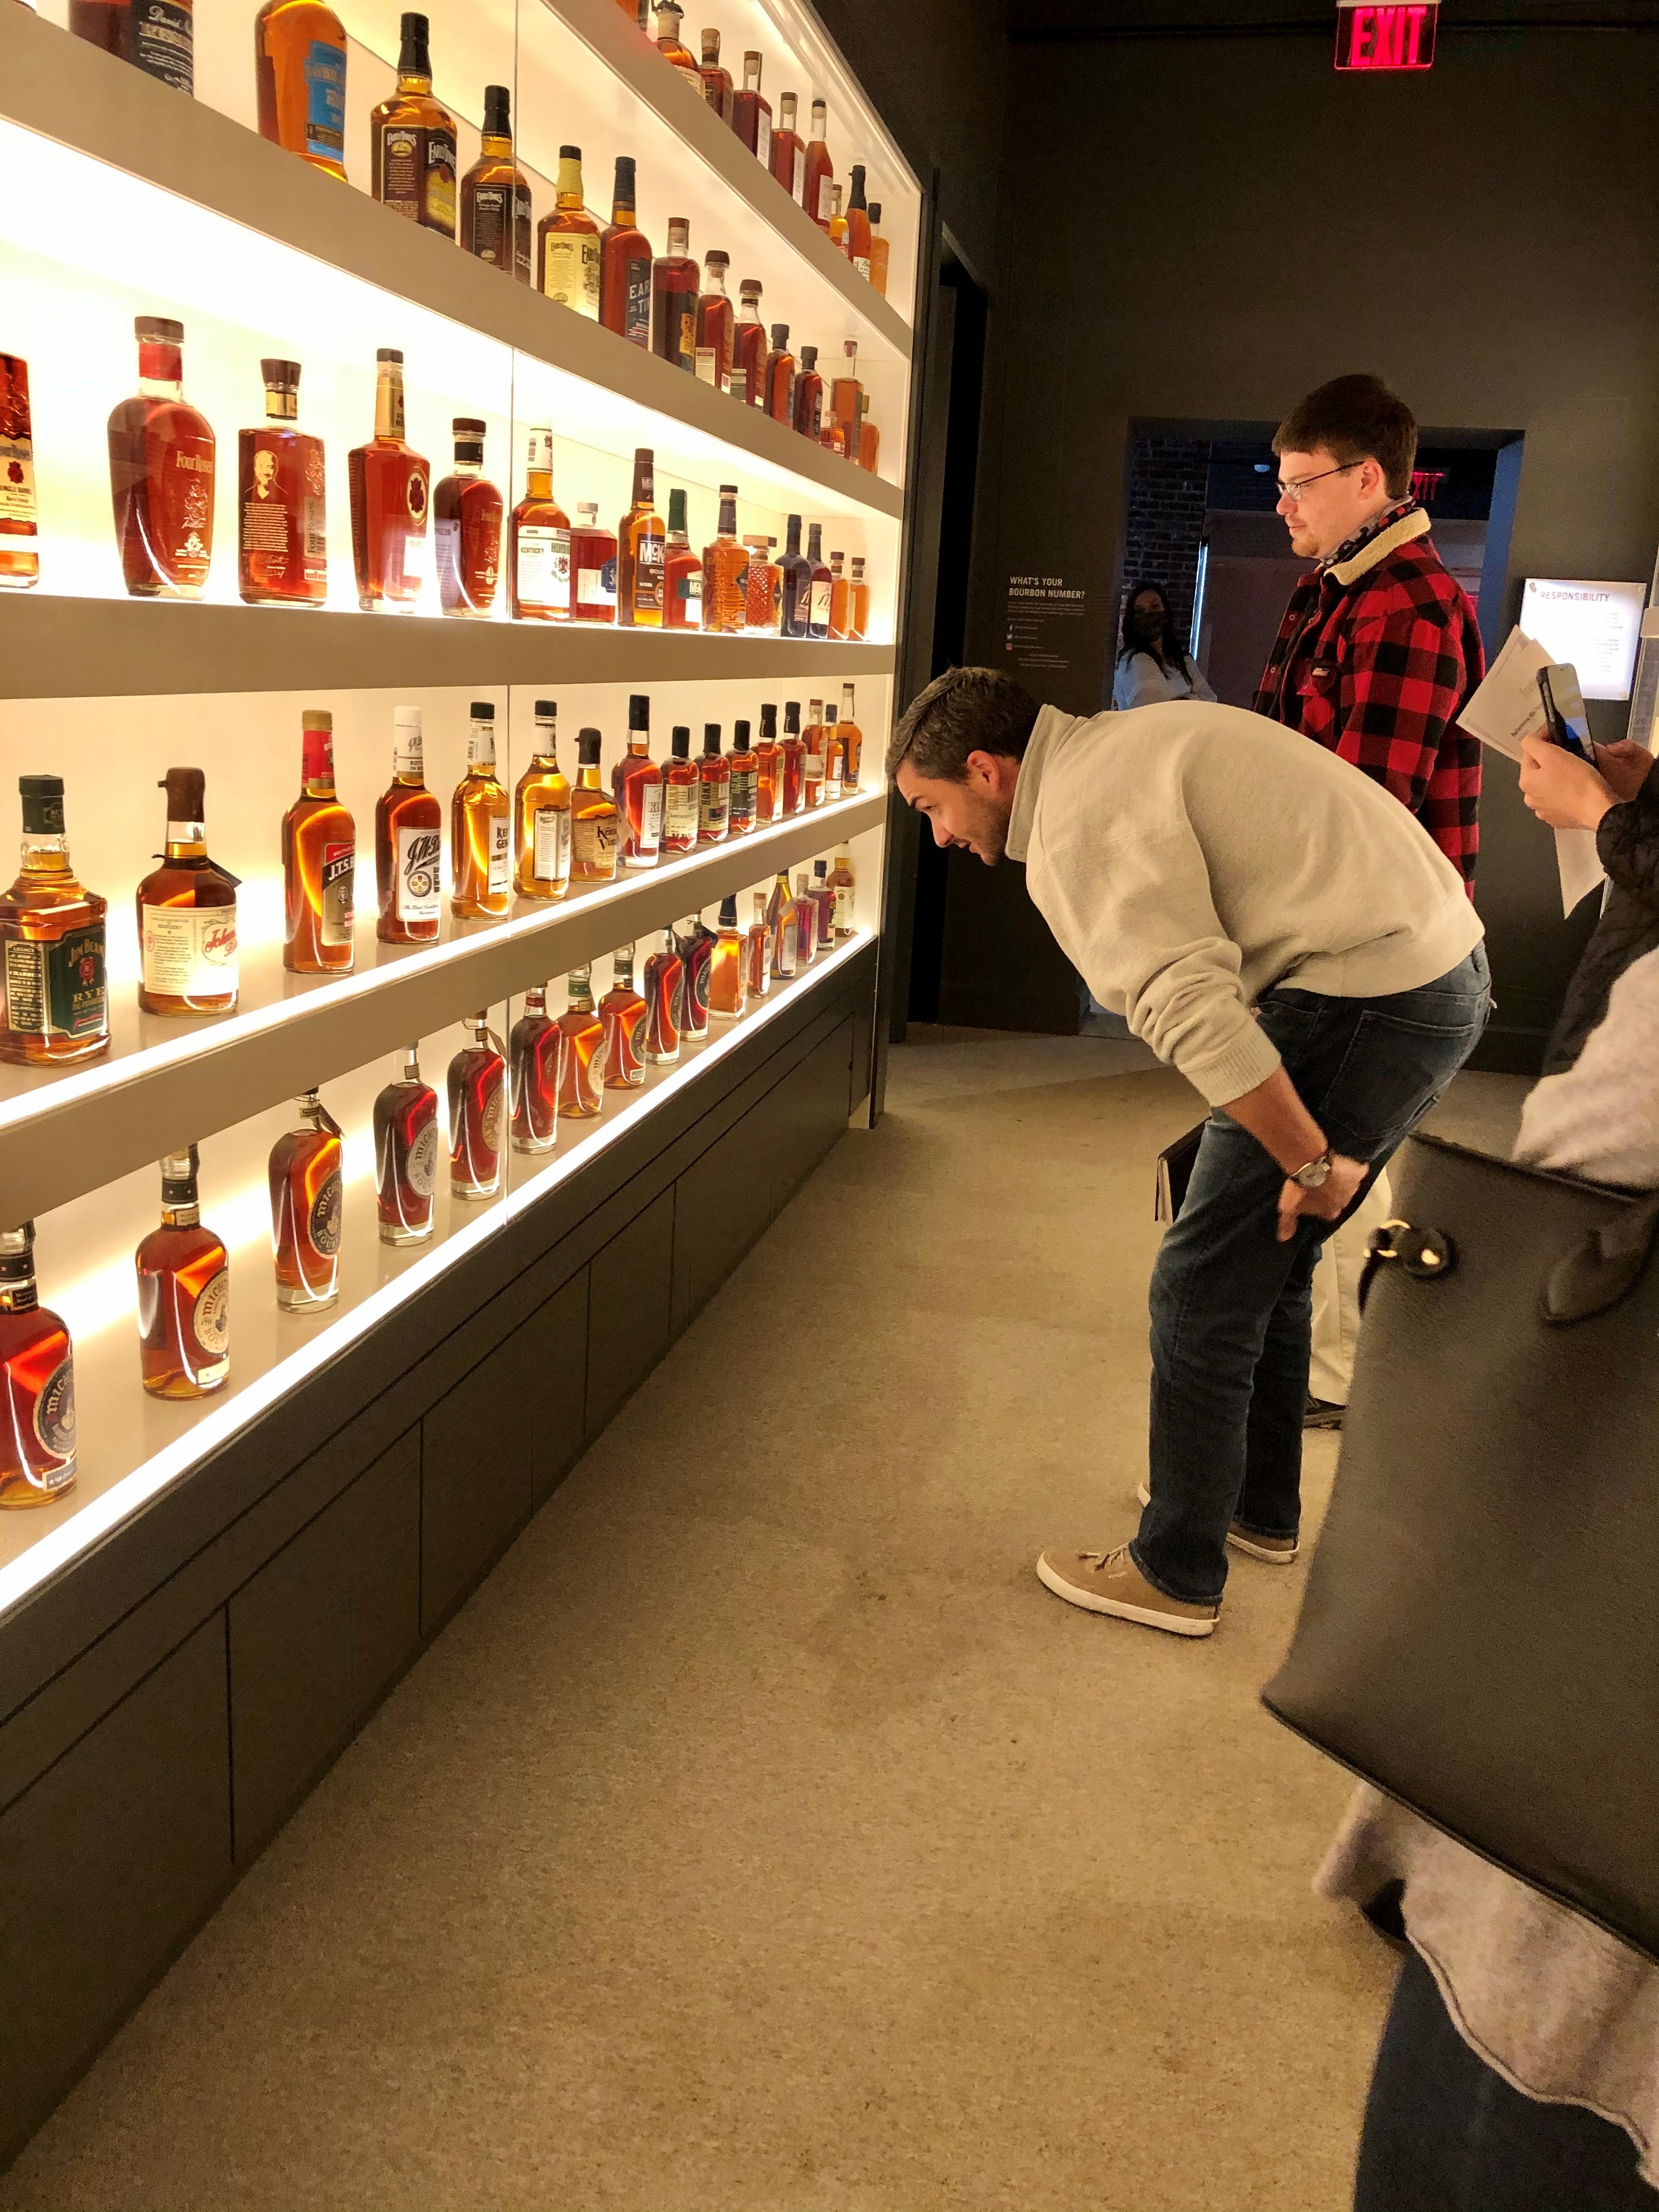 a student examines shelves displaying dozens of bottles of bourbon